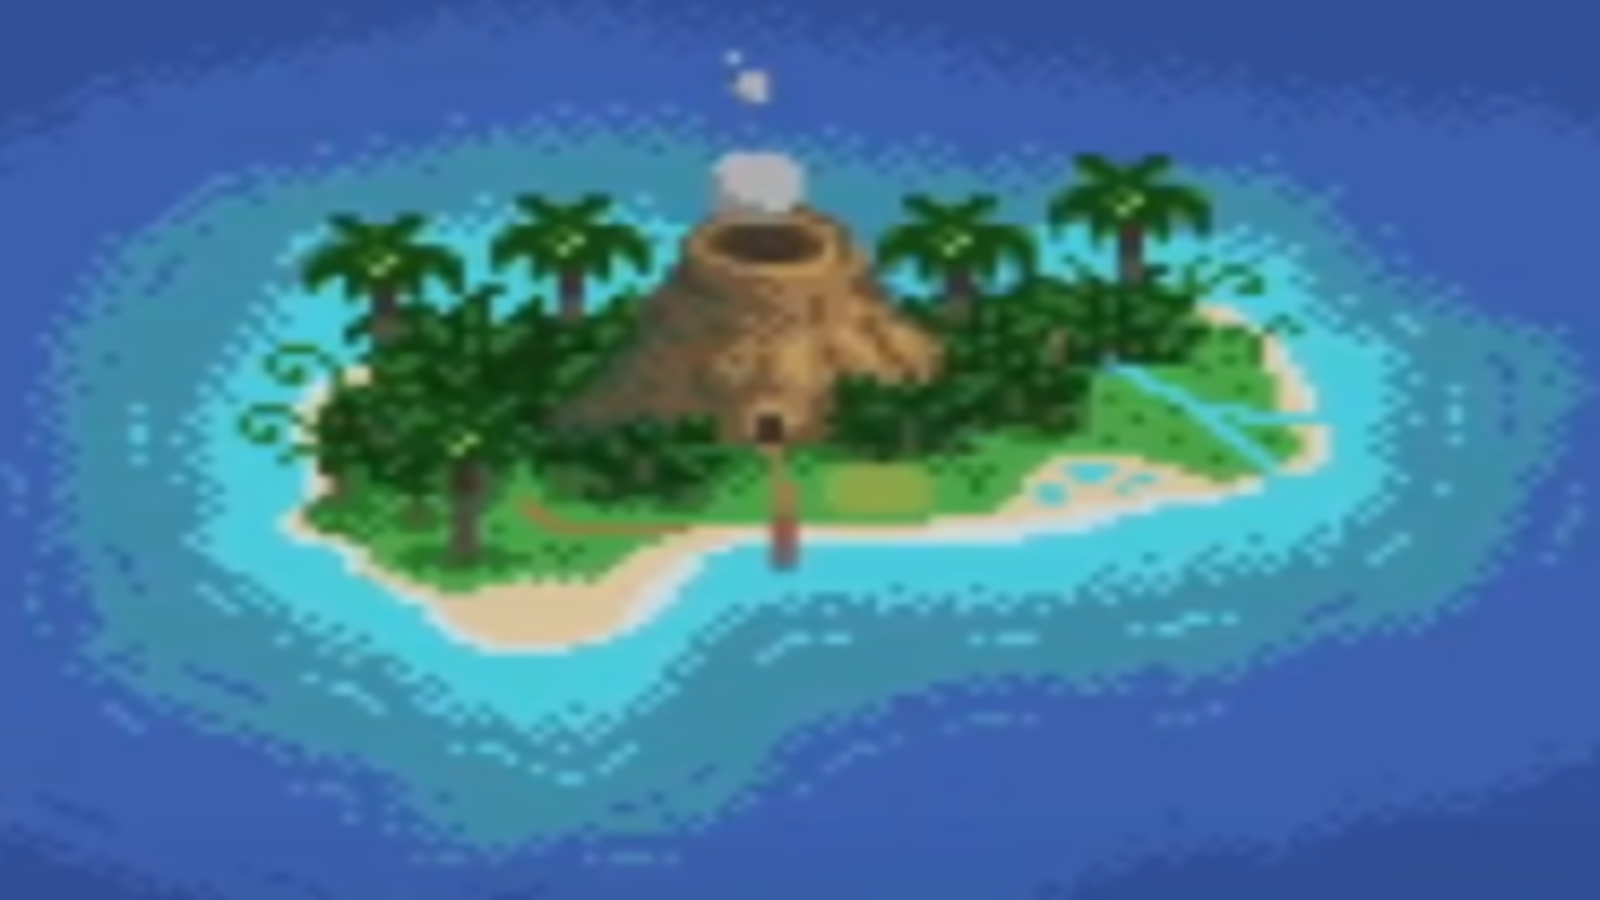 Moved our multiplayer farm over to the new beach map. Excited for my  friends to come online to play the new content together! : r/StardewValley